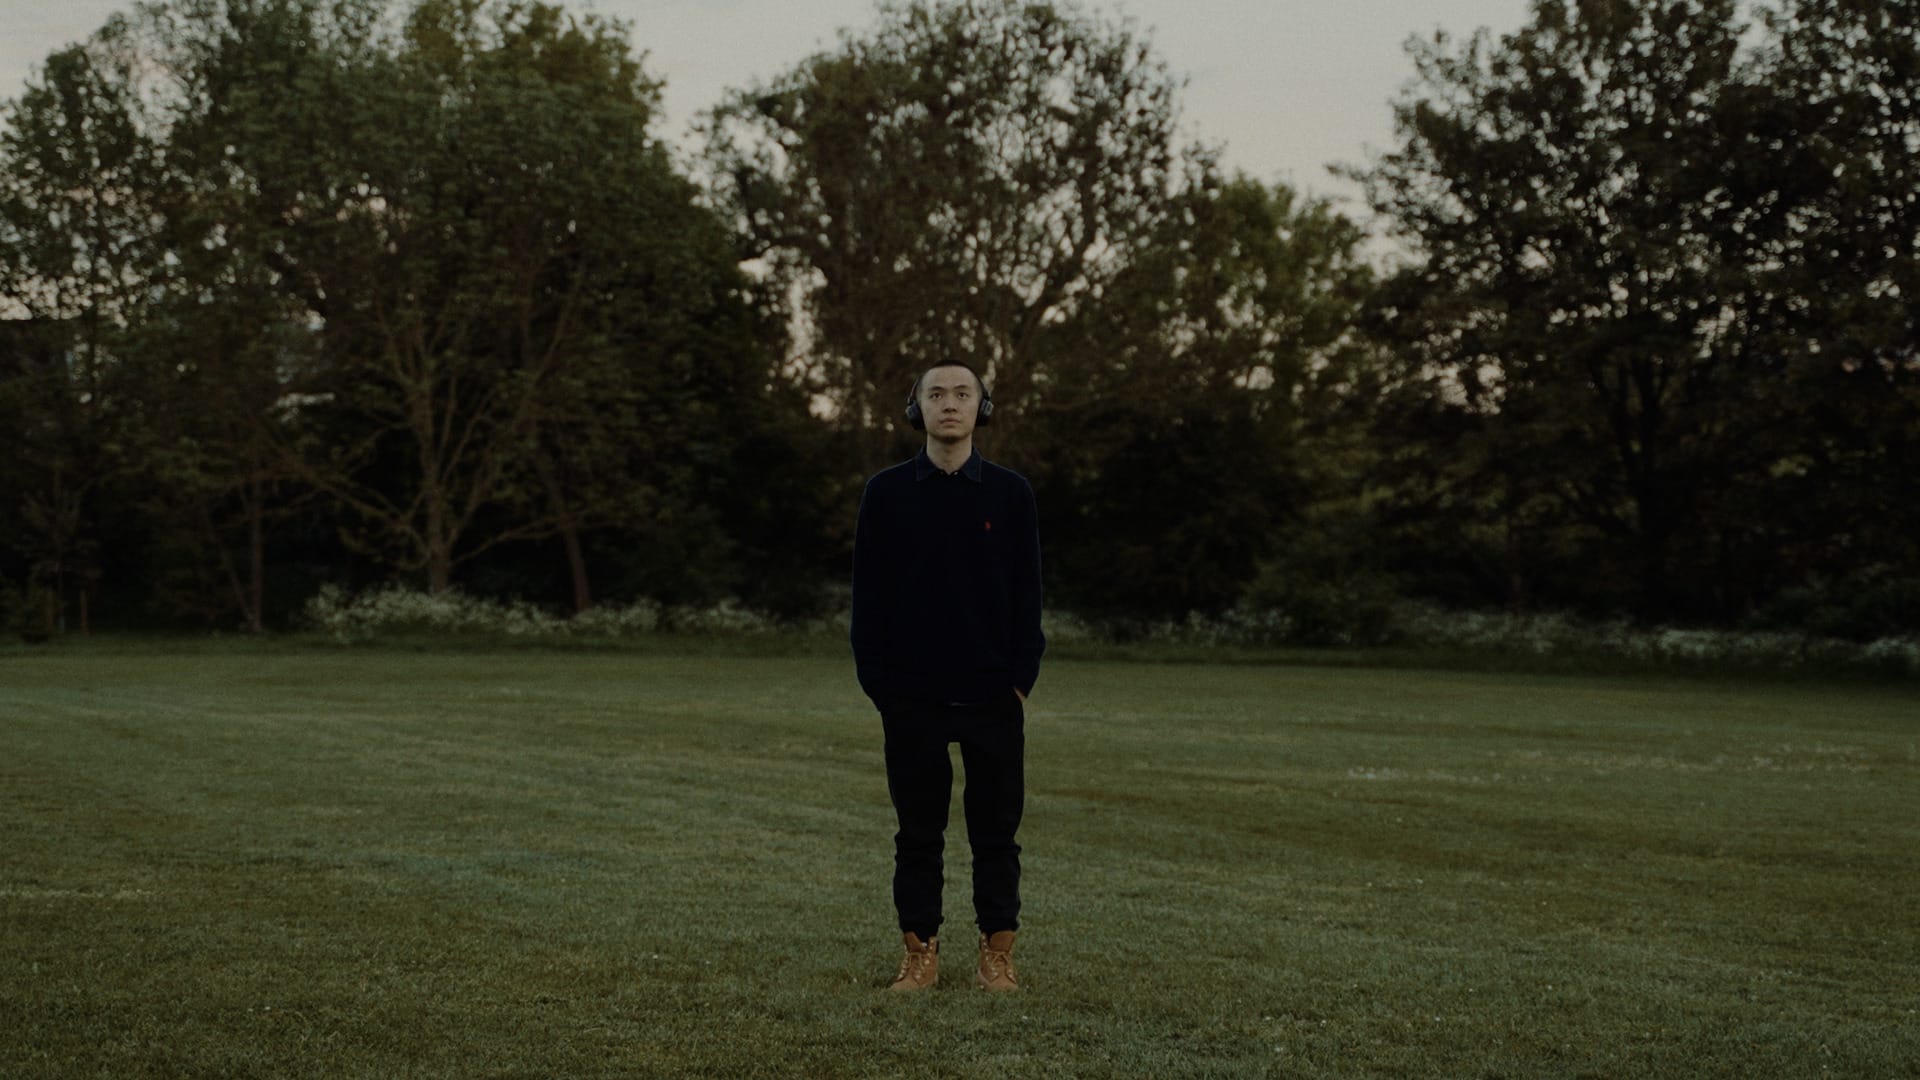 Bryan standing on a meadow